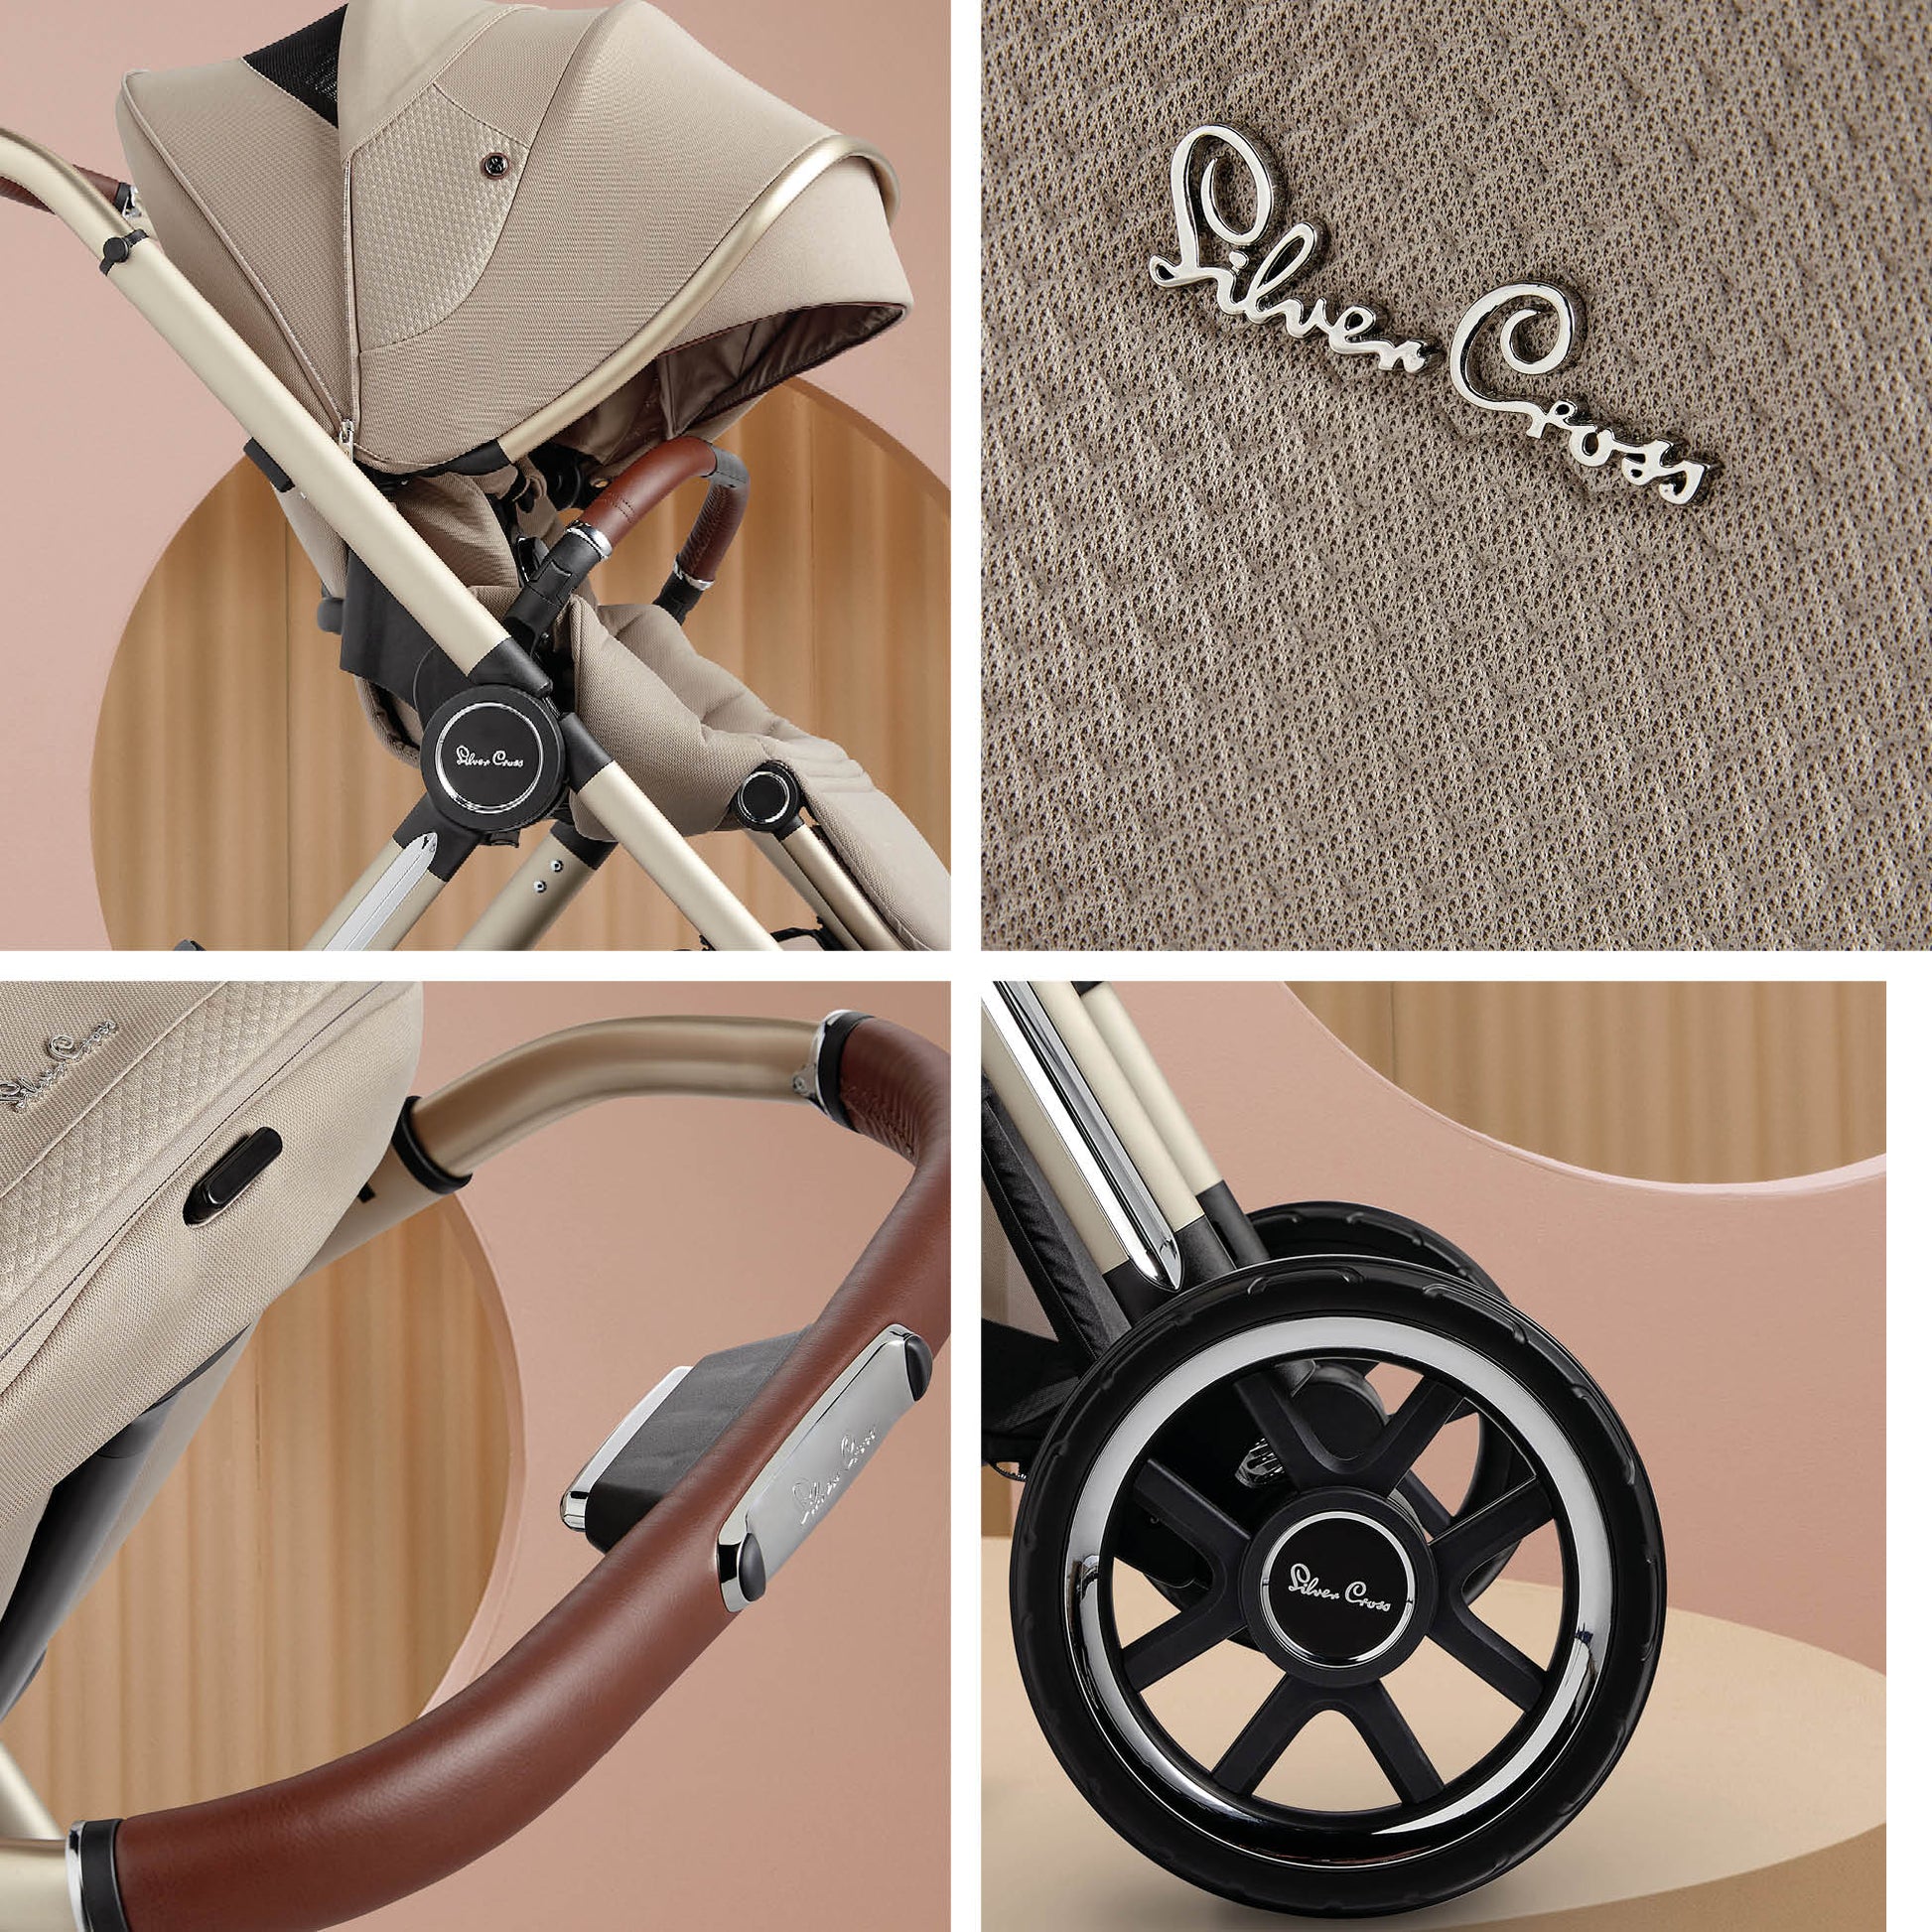 Silver Cross Reef Pushchair, First Bed Folding Carrycot & Maxi-Cosi Cabriofix Travel Pack - Stone